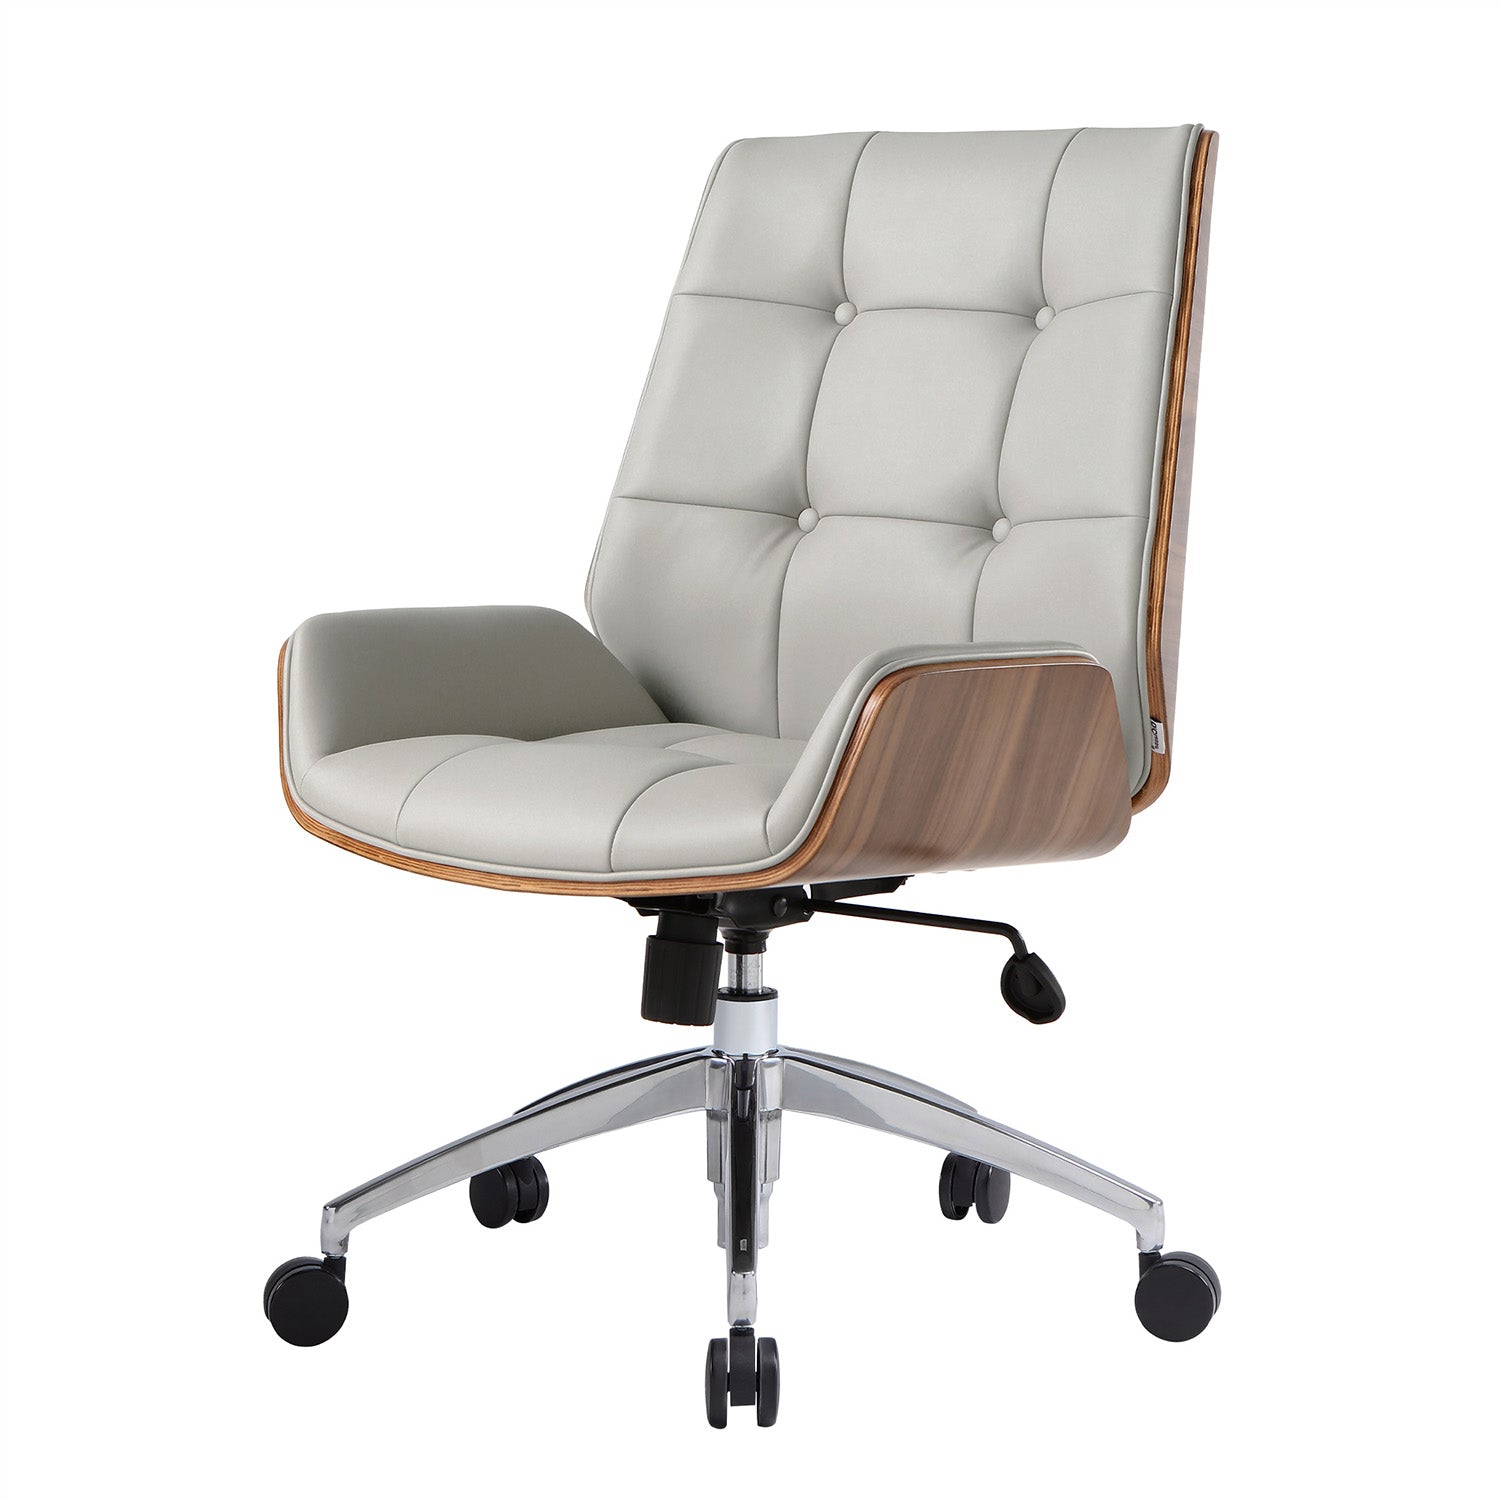 Executive Ergonomic Office Leather Chairs with Tilt and Height Adjustable, Light Gray